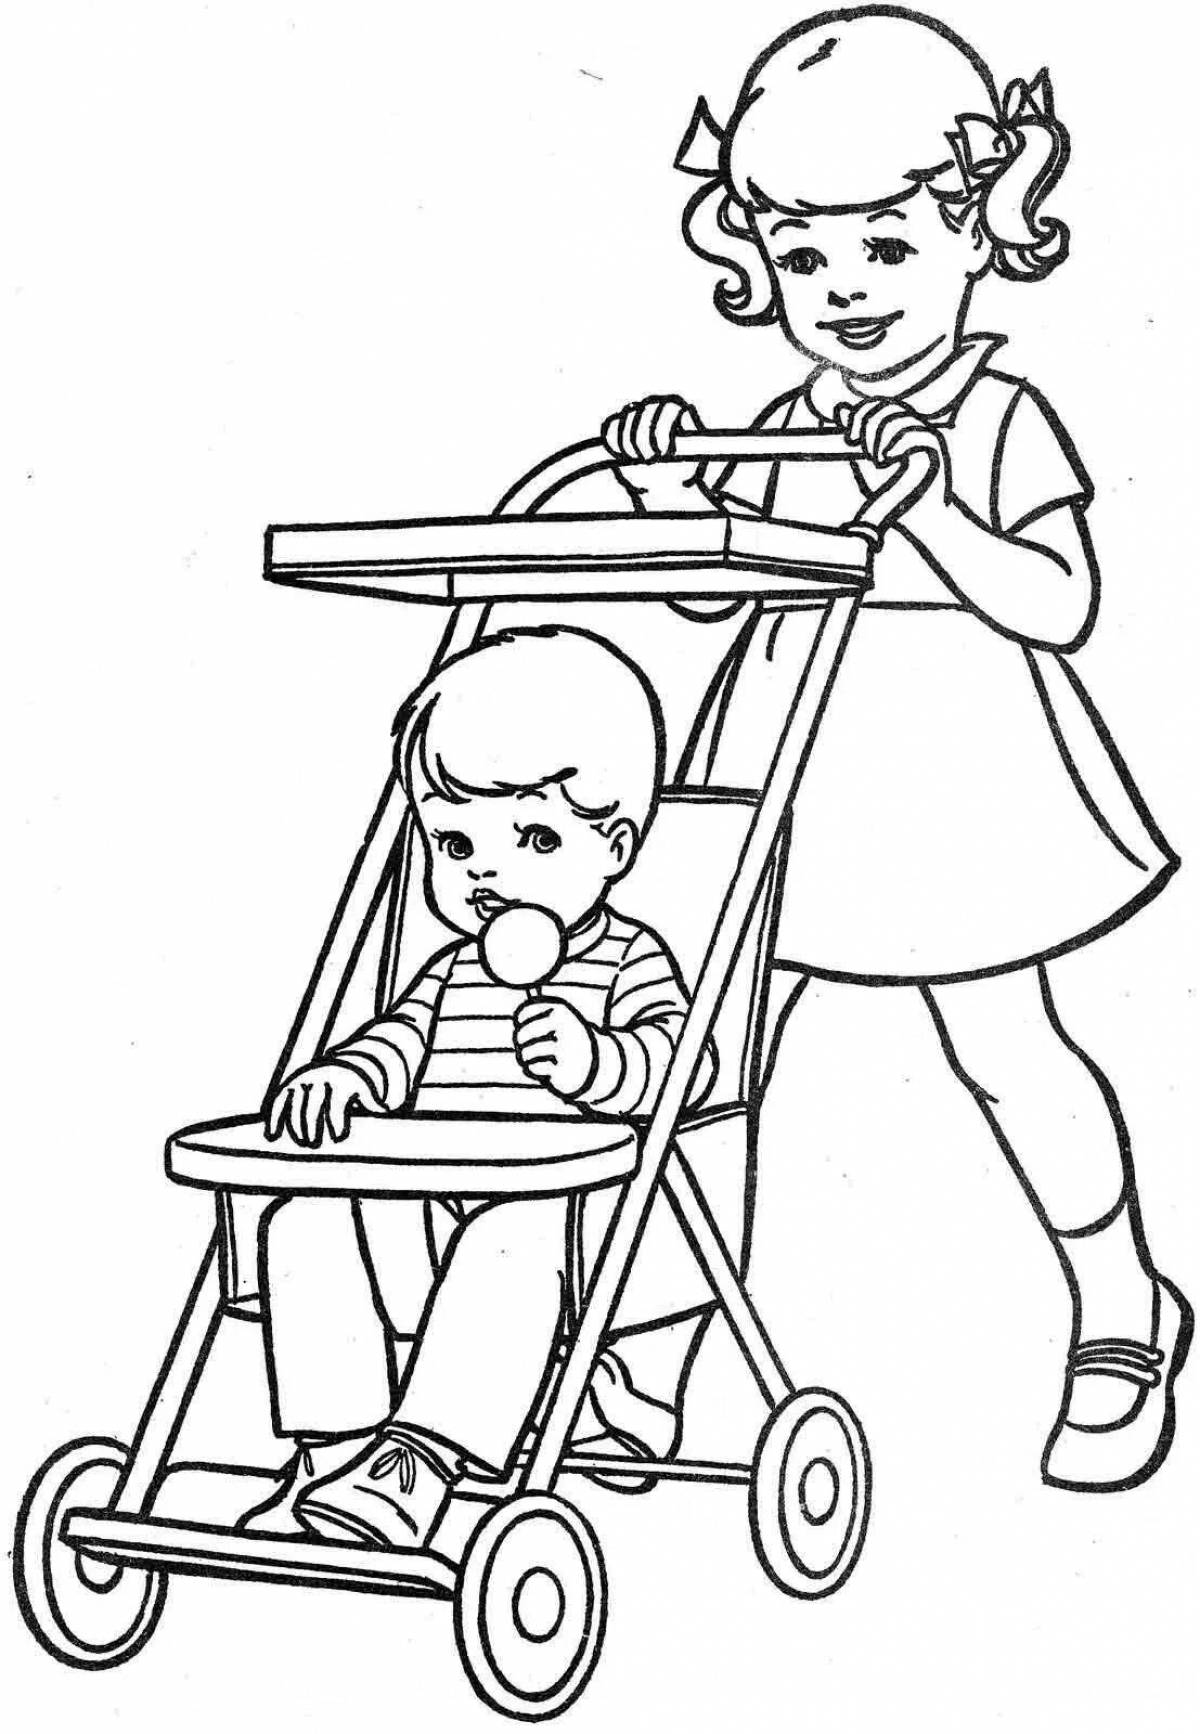 Charming coloring book baby in stroller